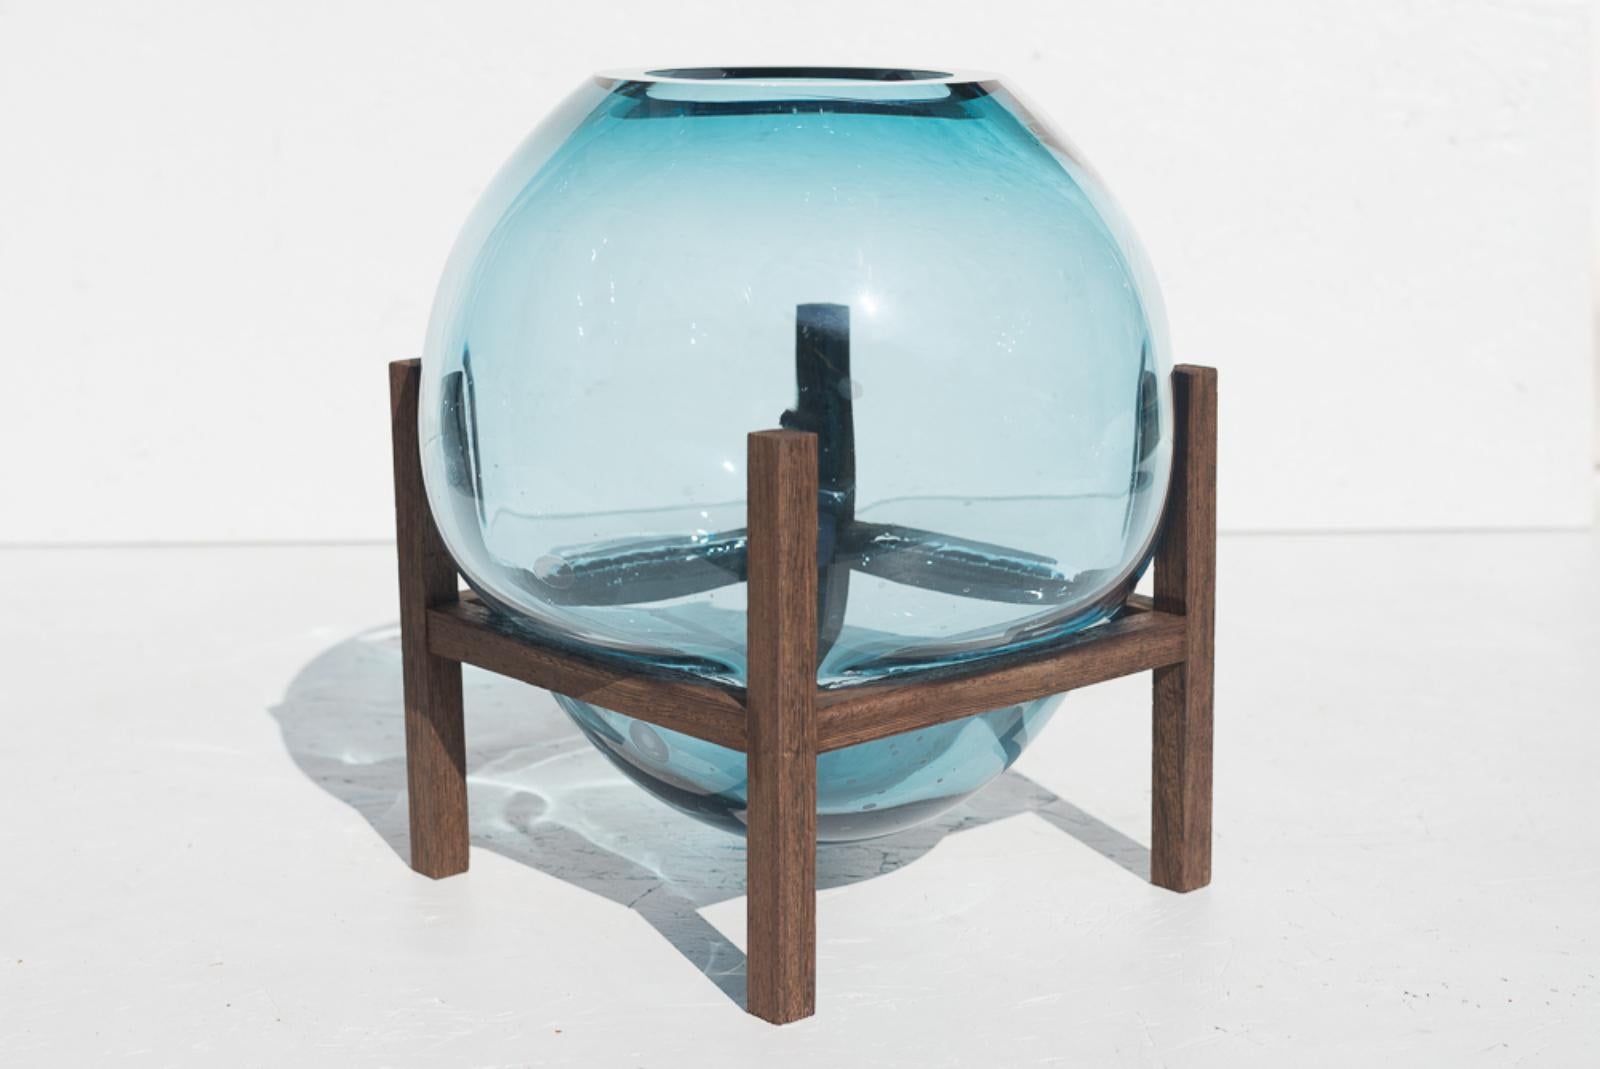 Set Of 4 Round Square Blue Up & Down Vase by Studio Thier & van Daalen
Dimensions: W 30 x D 30 x H 35cm
Materials: Wood, Glass

When blowing soap bubbles in the air Iris & Ruben had the dream to capture these temporary beauties in a tendril